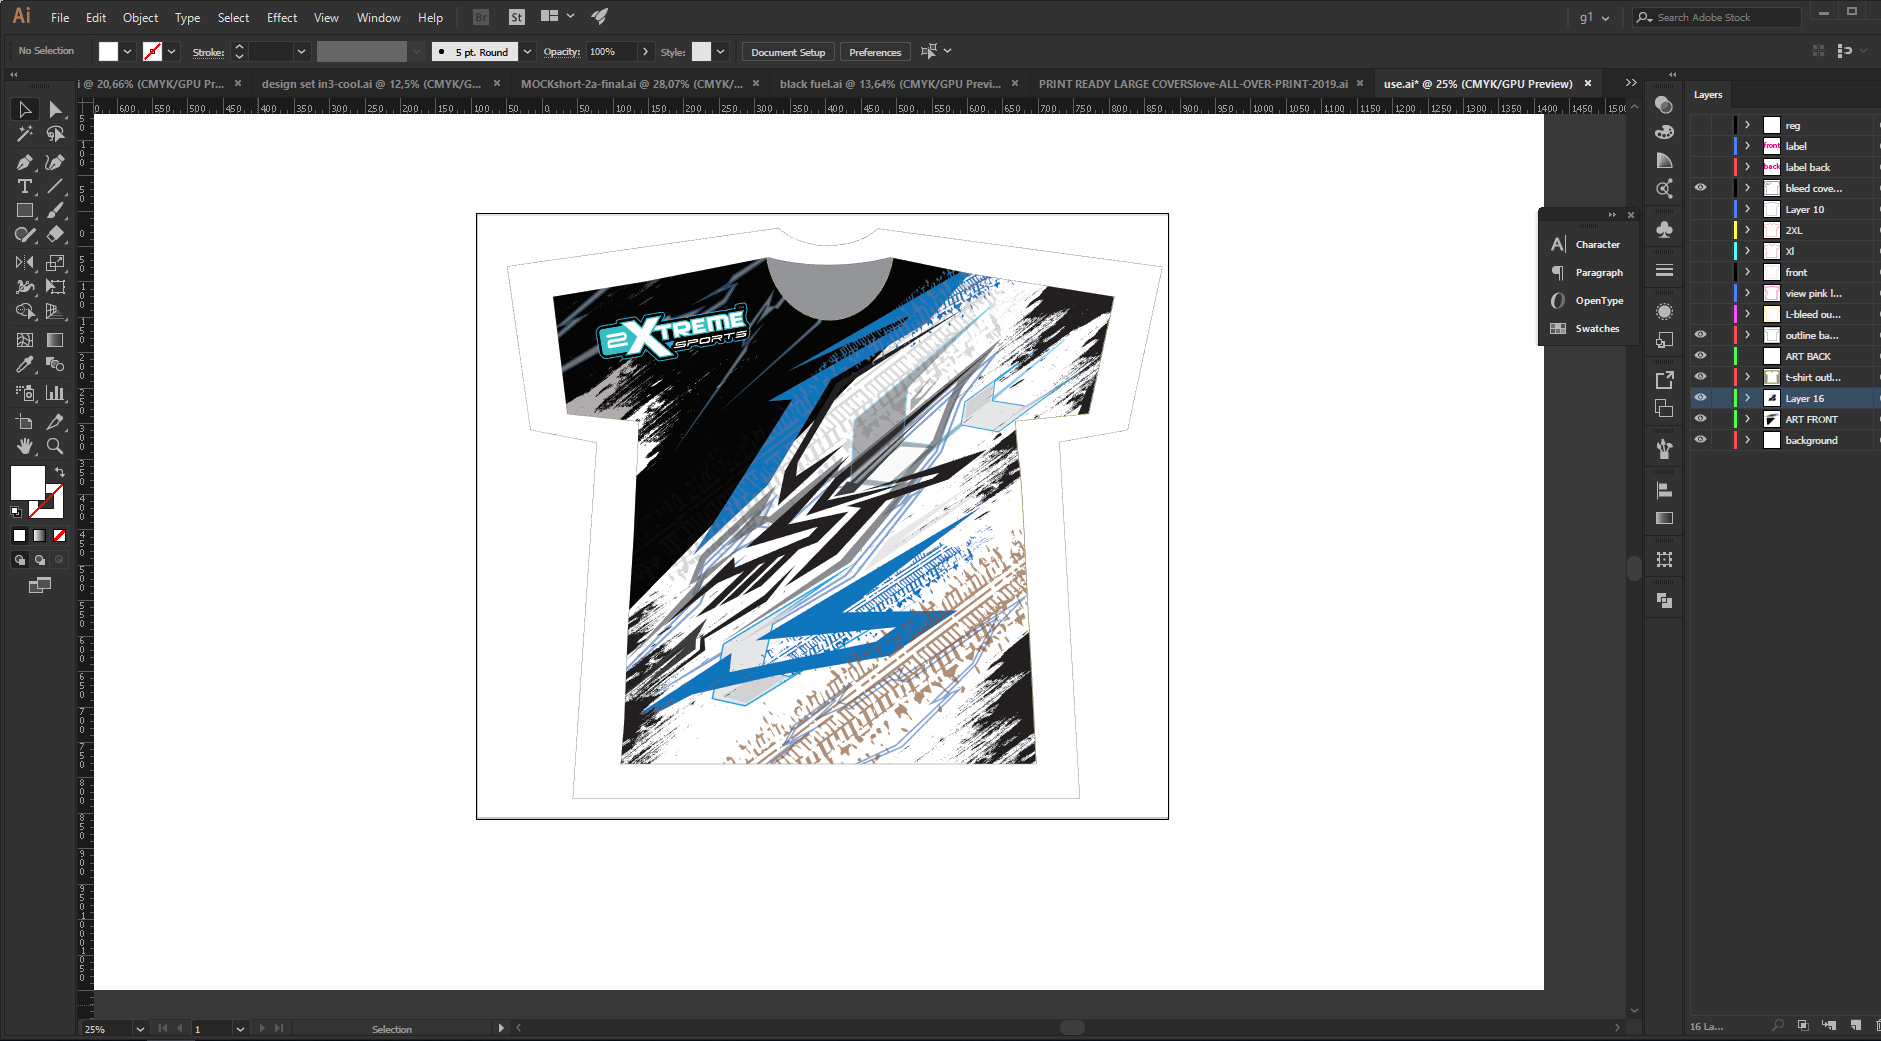 Customization templates all over print - T-shirt Printing Solutions